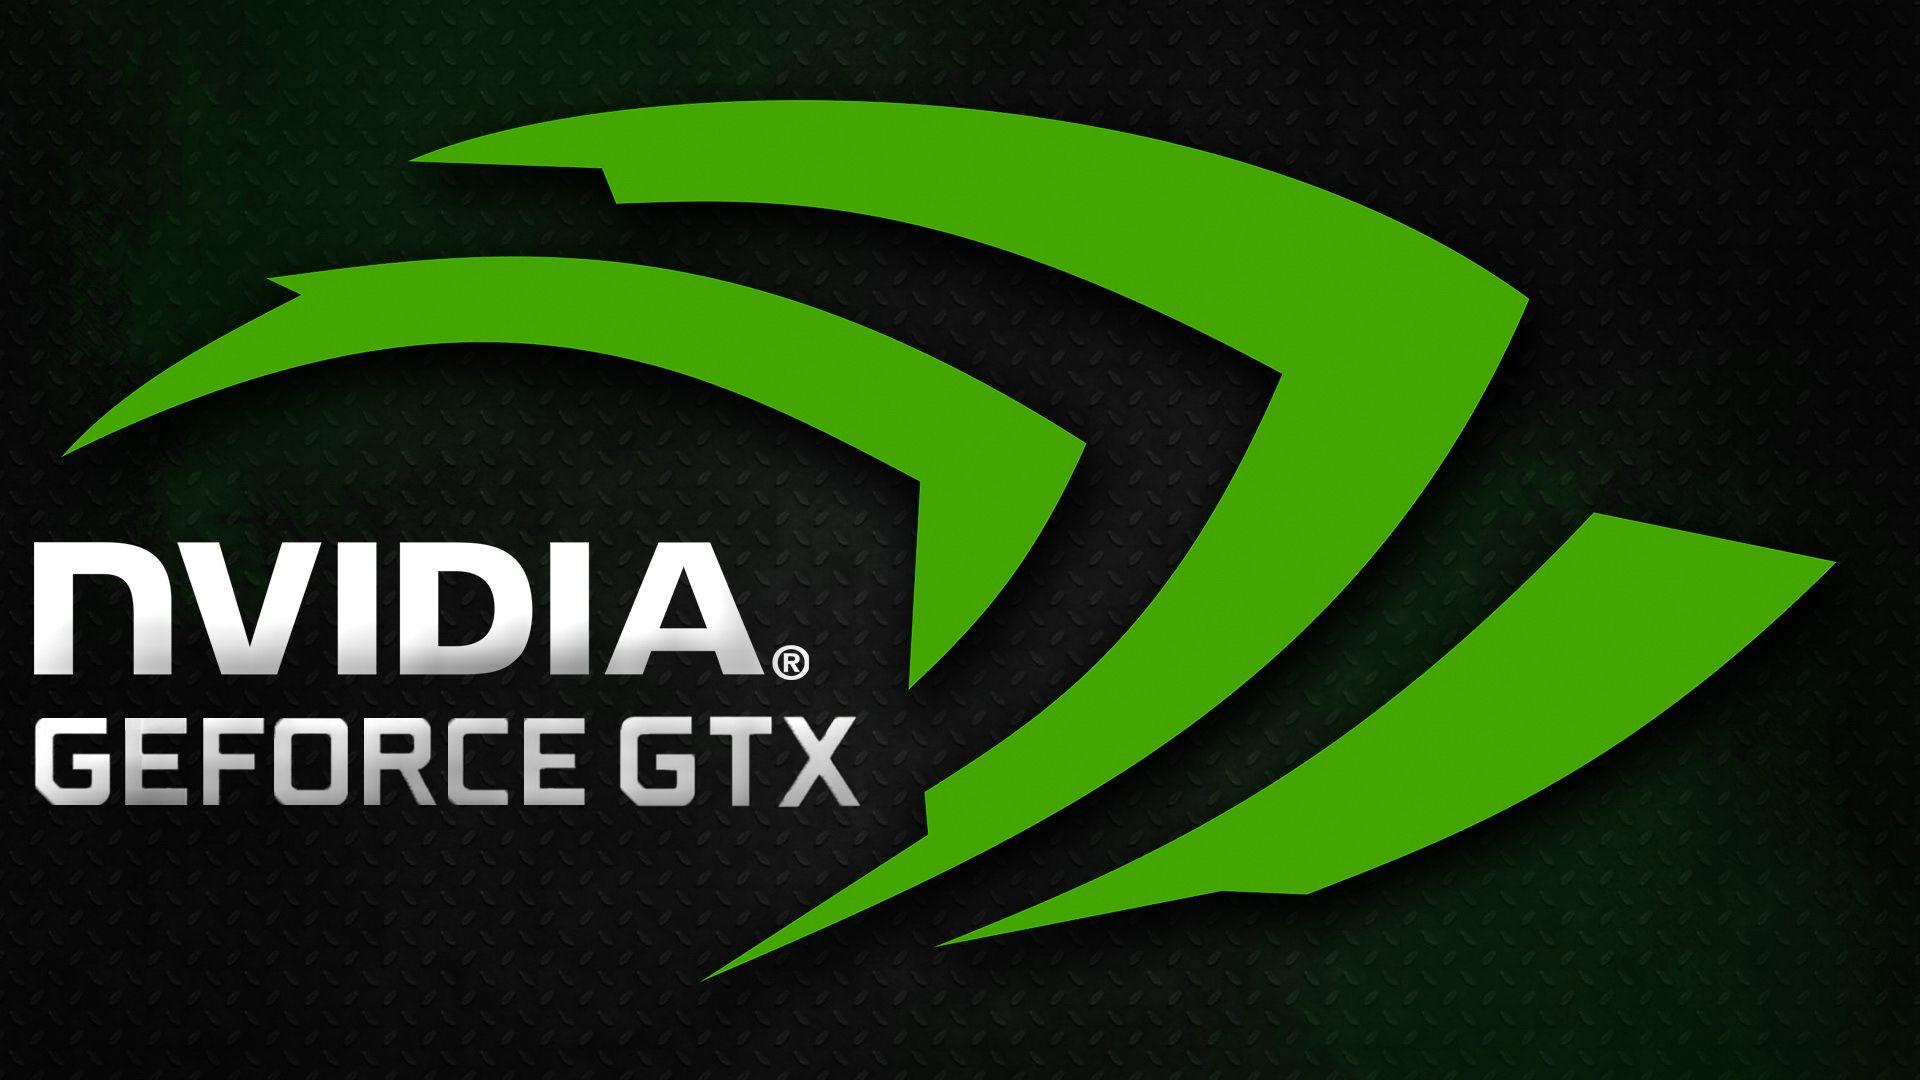 GeForce Logo - NVIDIA GeForce GTX 900 Series is obsolete, say hello to Legacy drivers